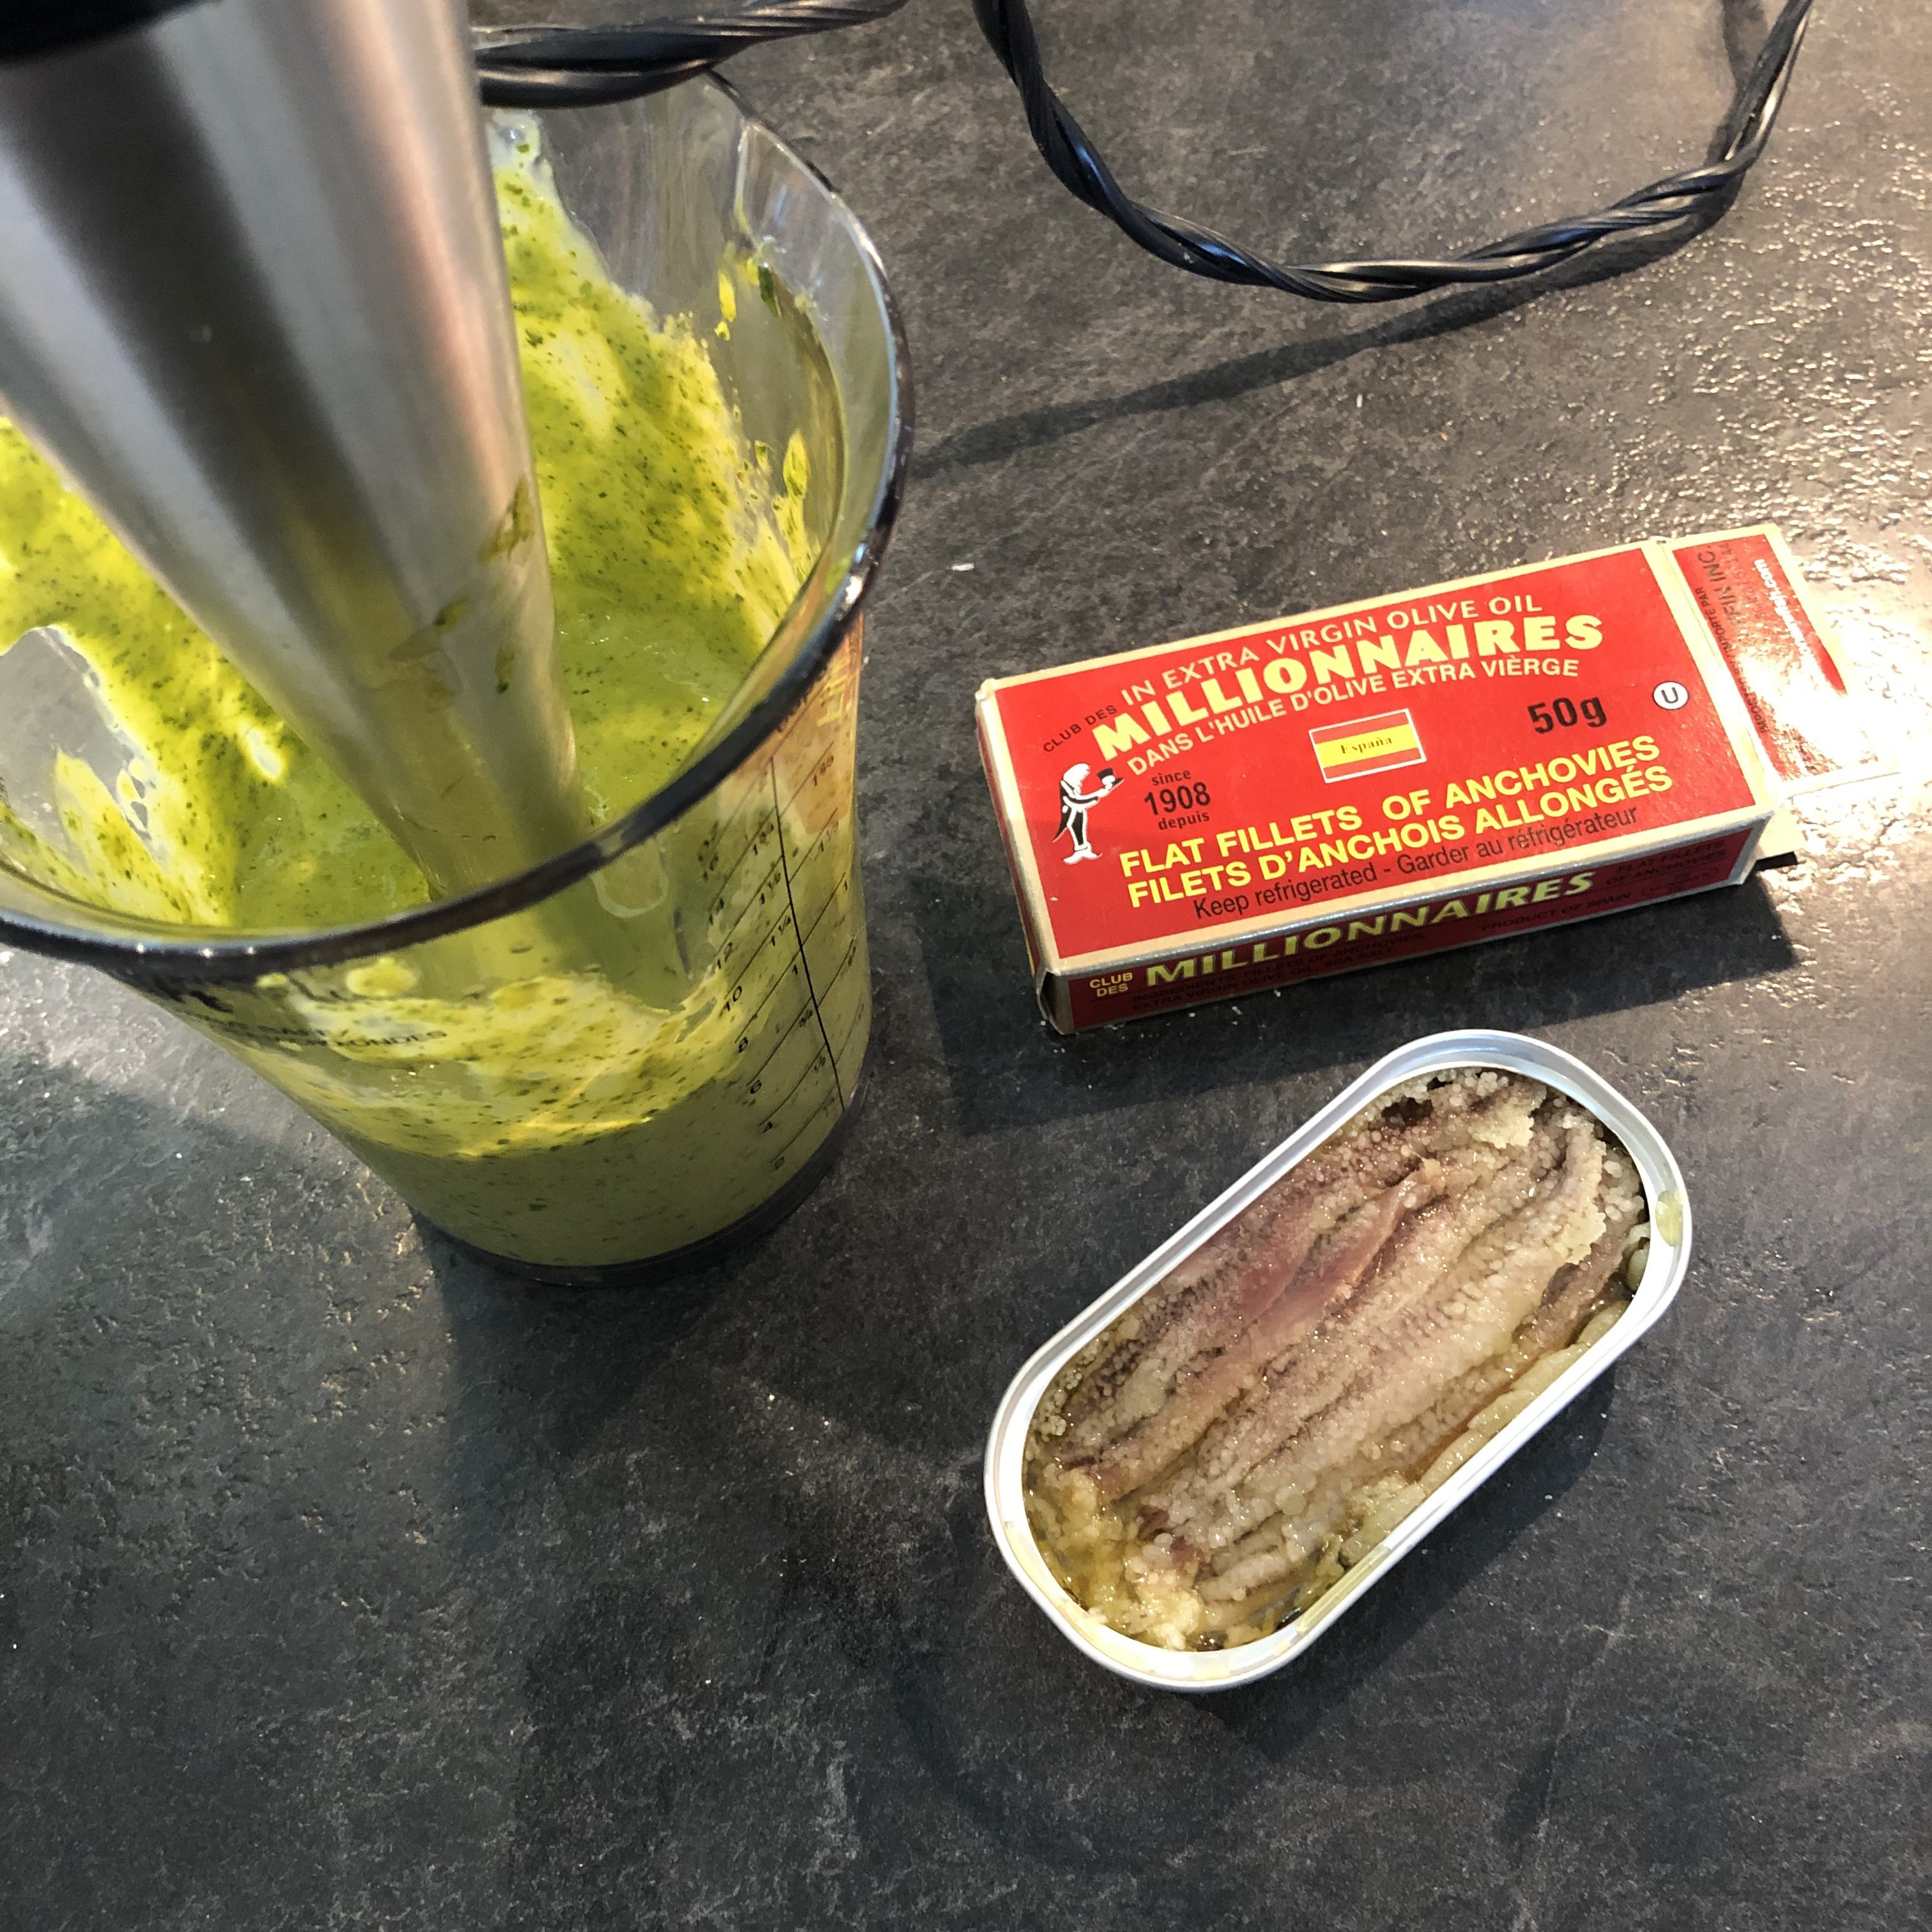 Blending Basil Dip With Anchovies